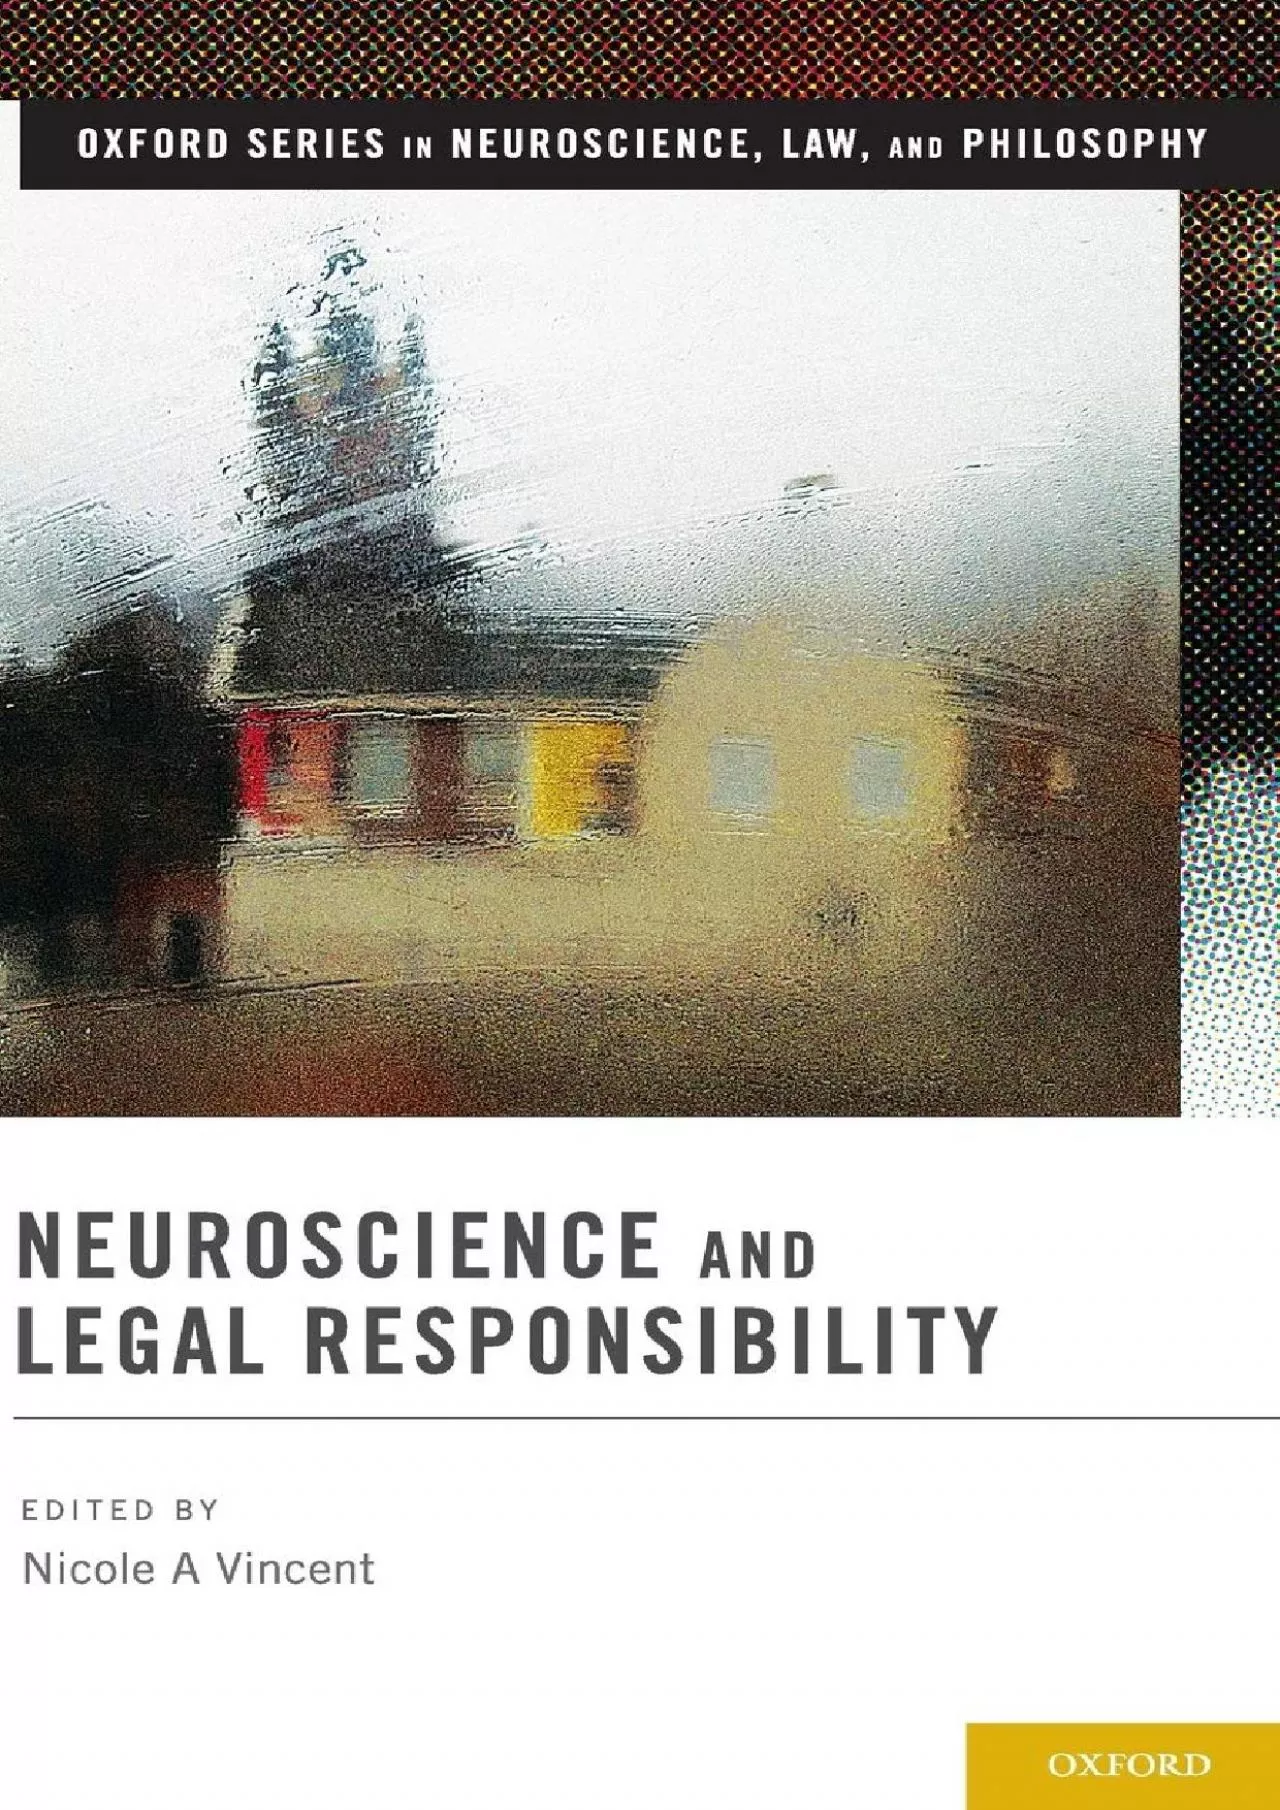 (READ)-Neuroscience and Legal Responsibility (Oxford Series in Neuroscience, Law, and